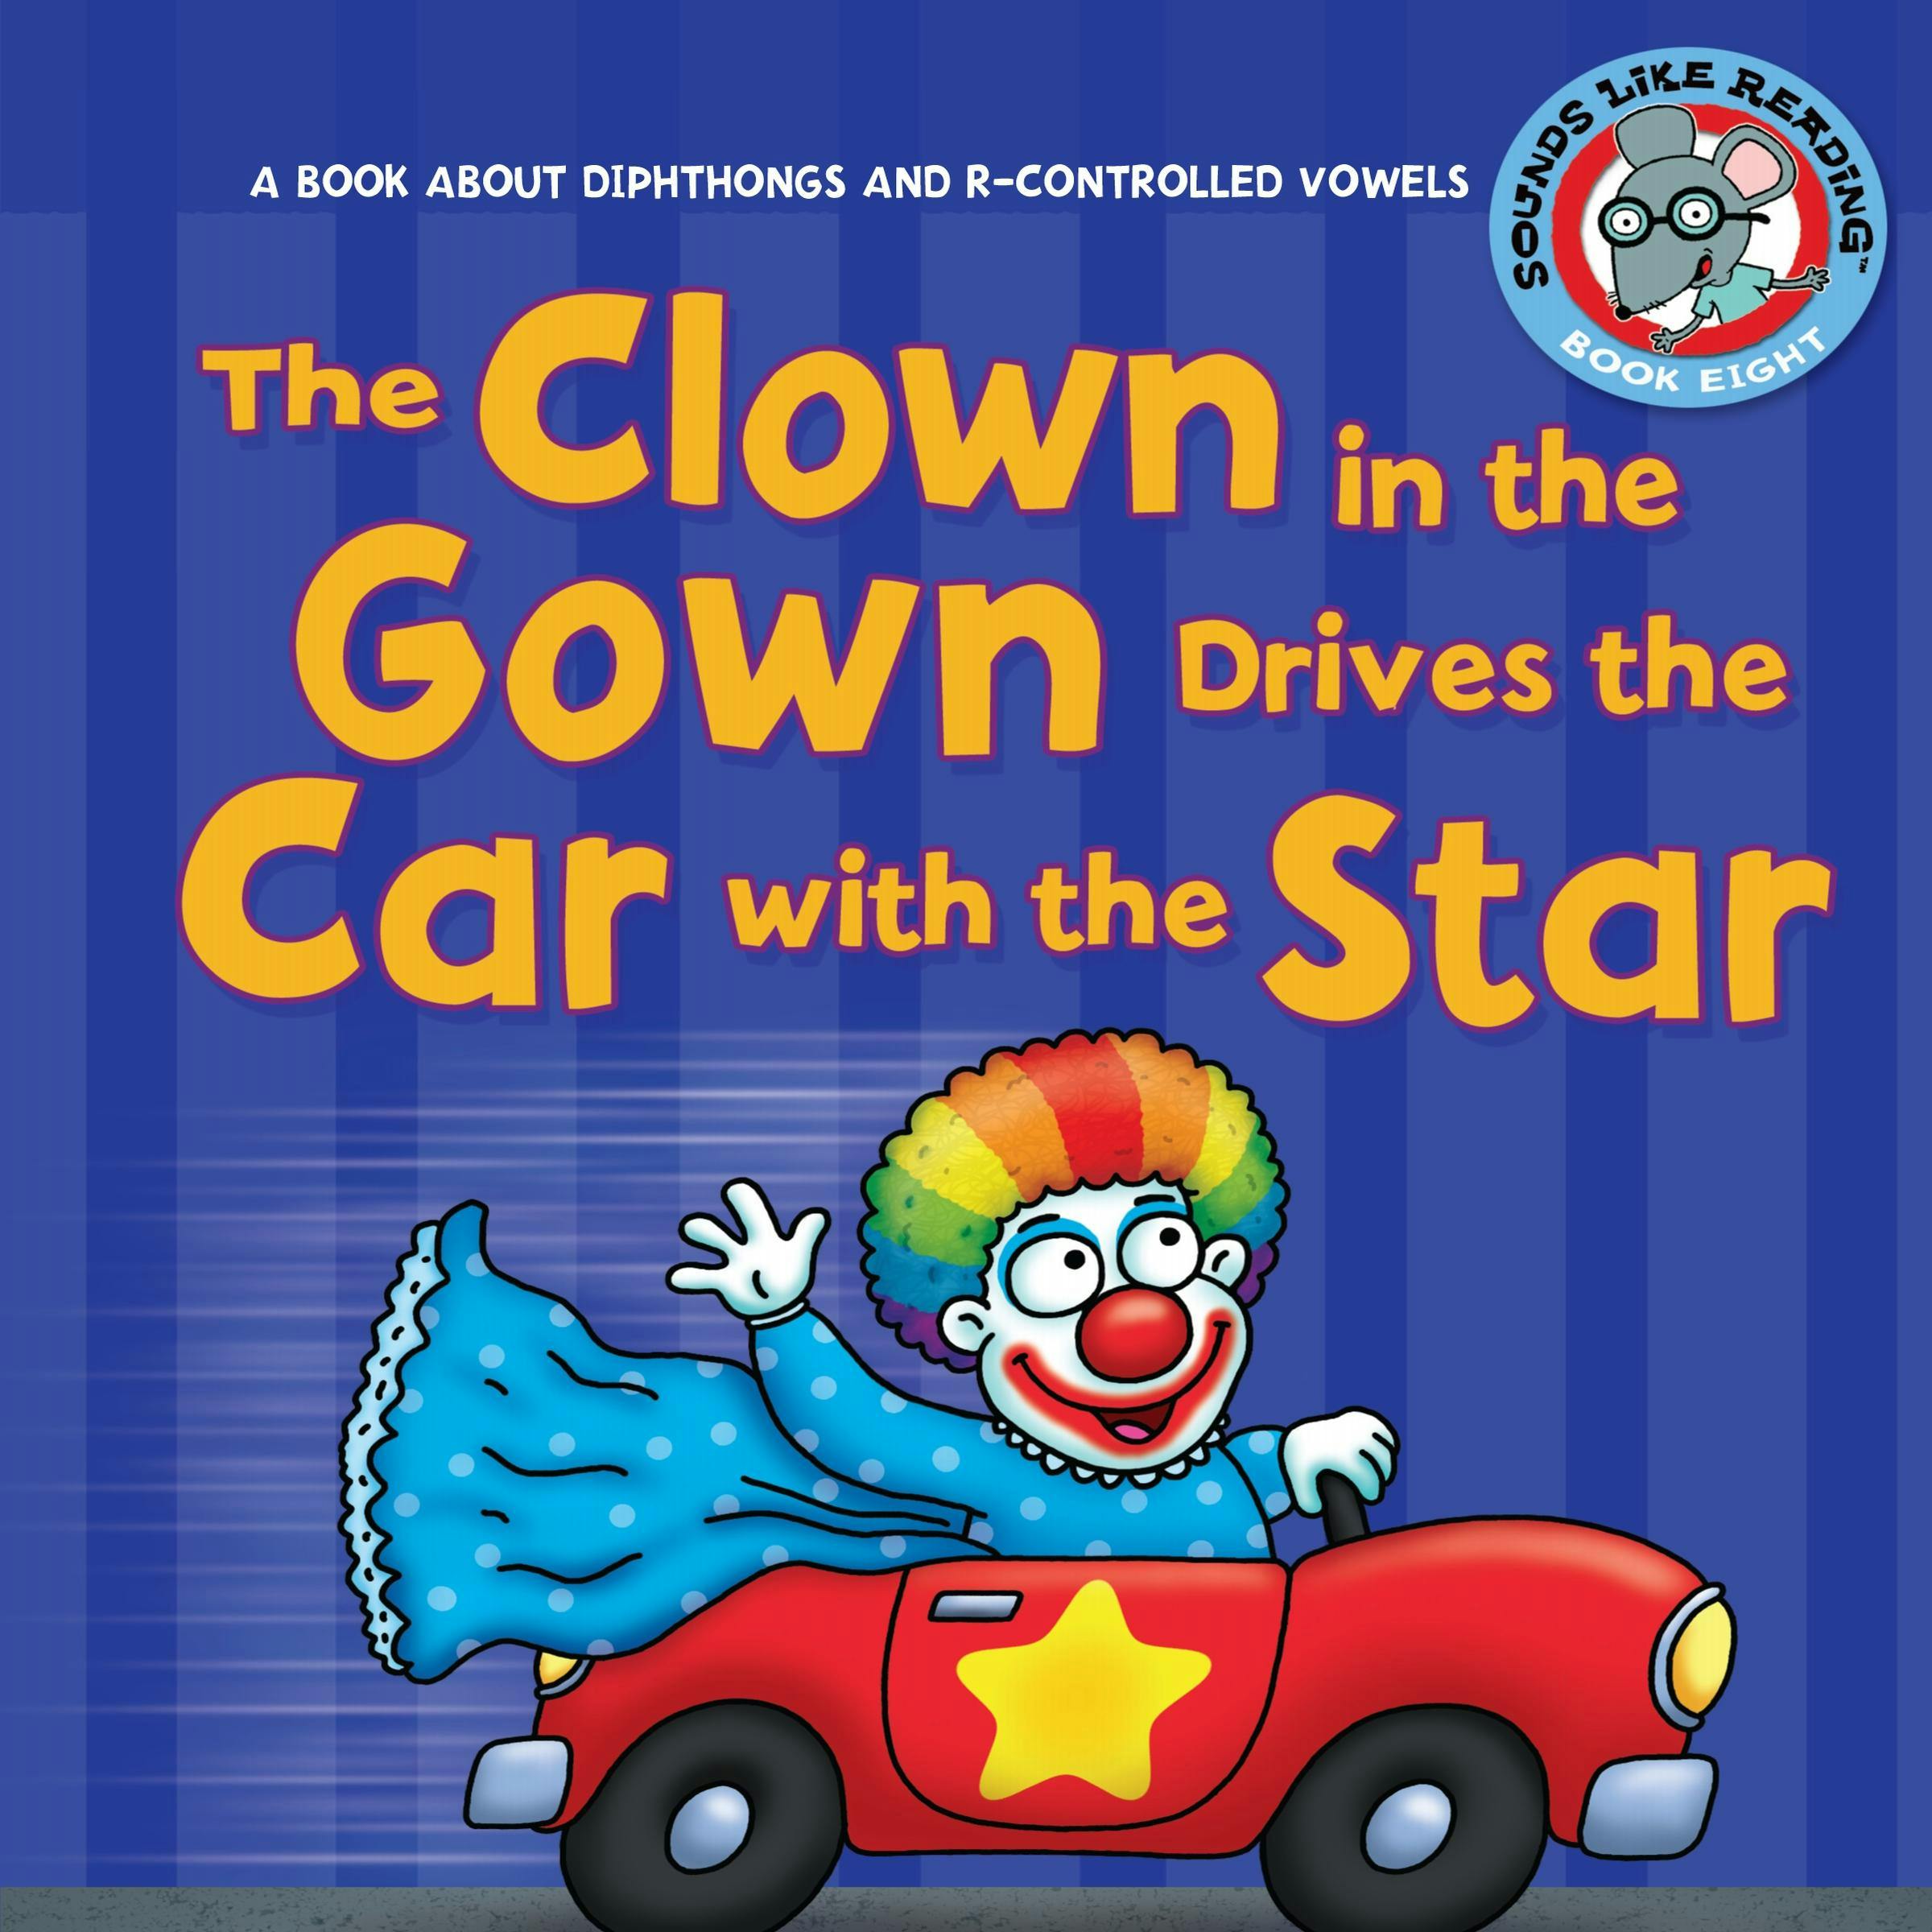 The Clown in the Gown Drives the Car with the Star: A Book about Diphthongs and R-Controlled Vowels - Jason Miskimins, Brian P. Cleary